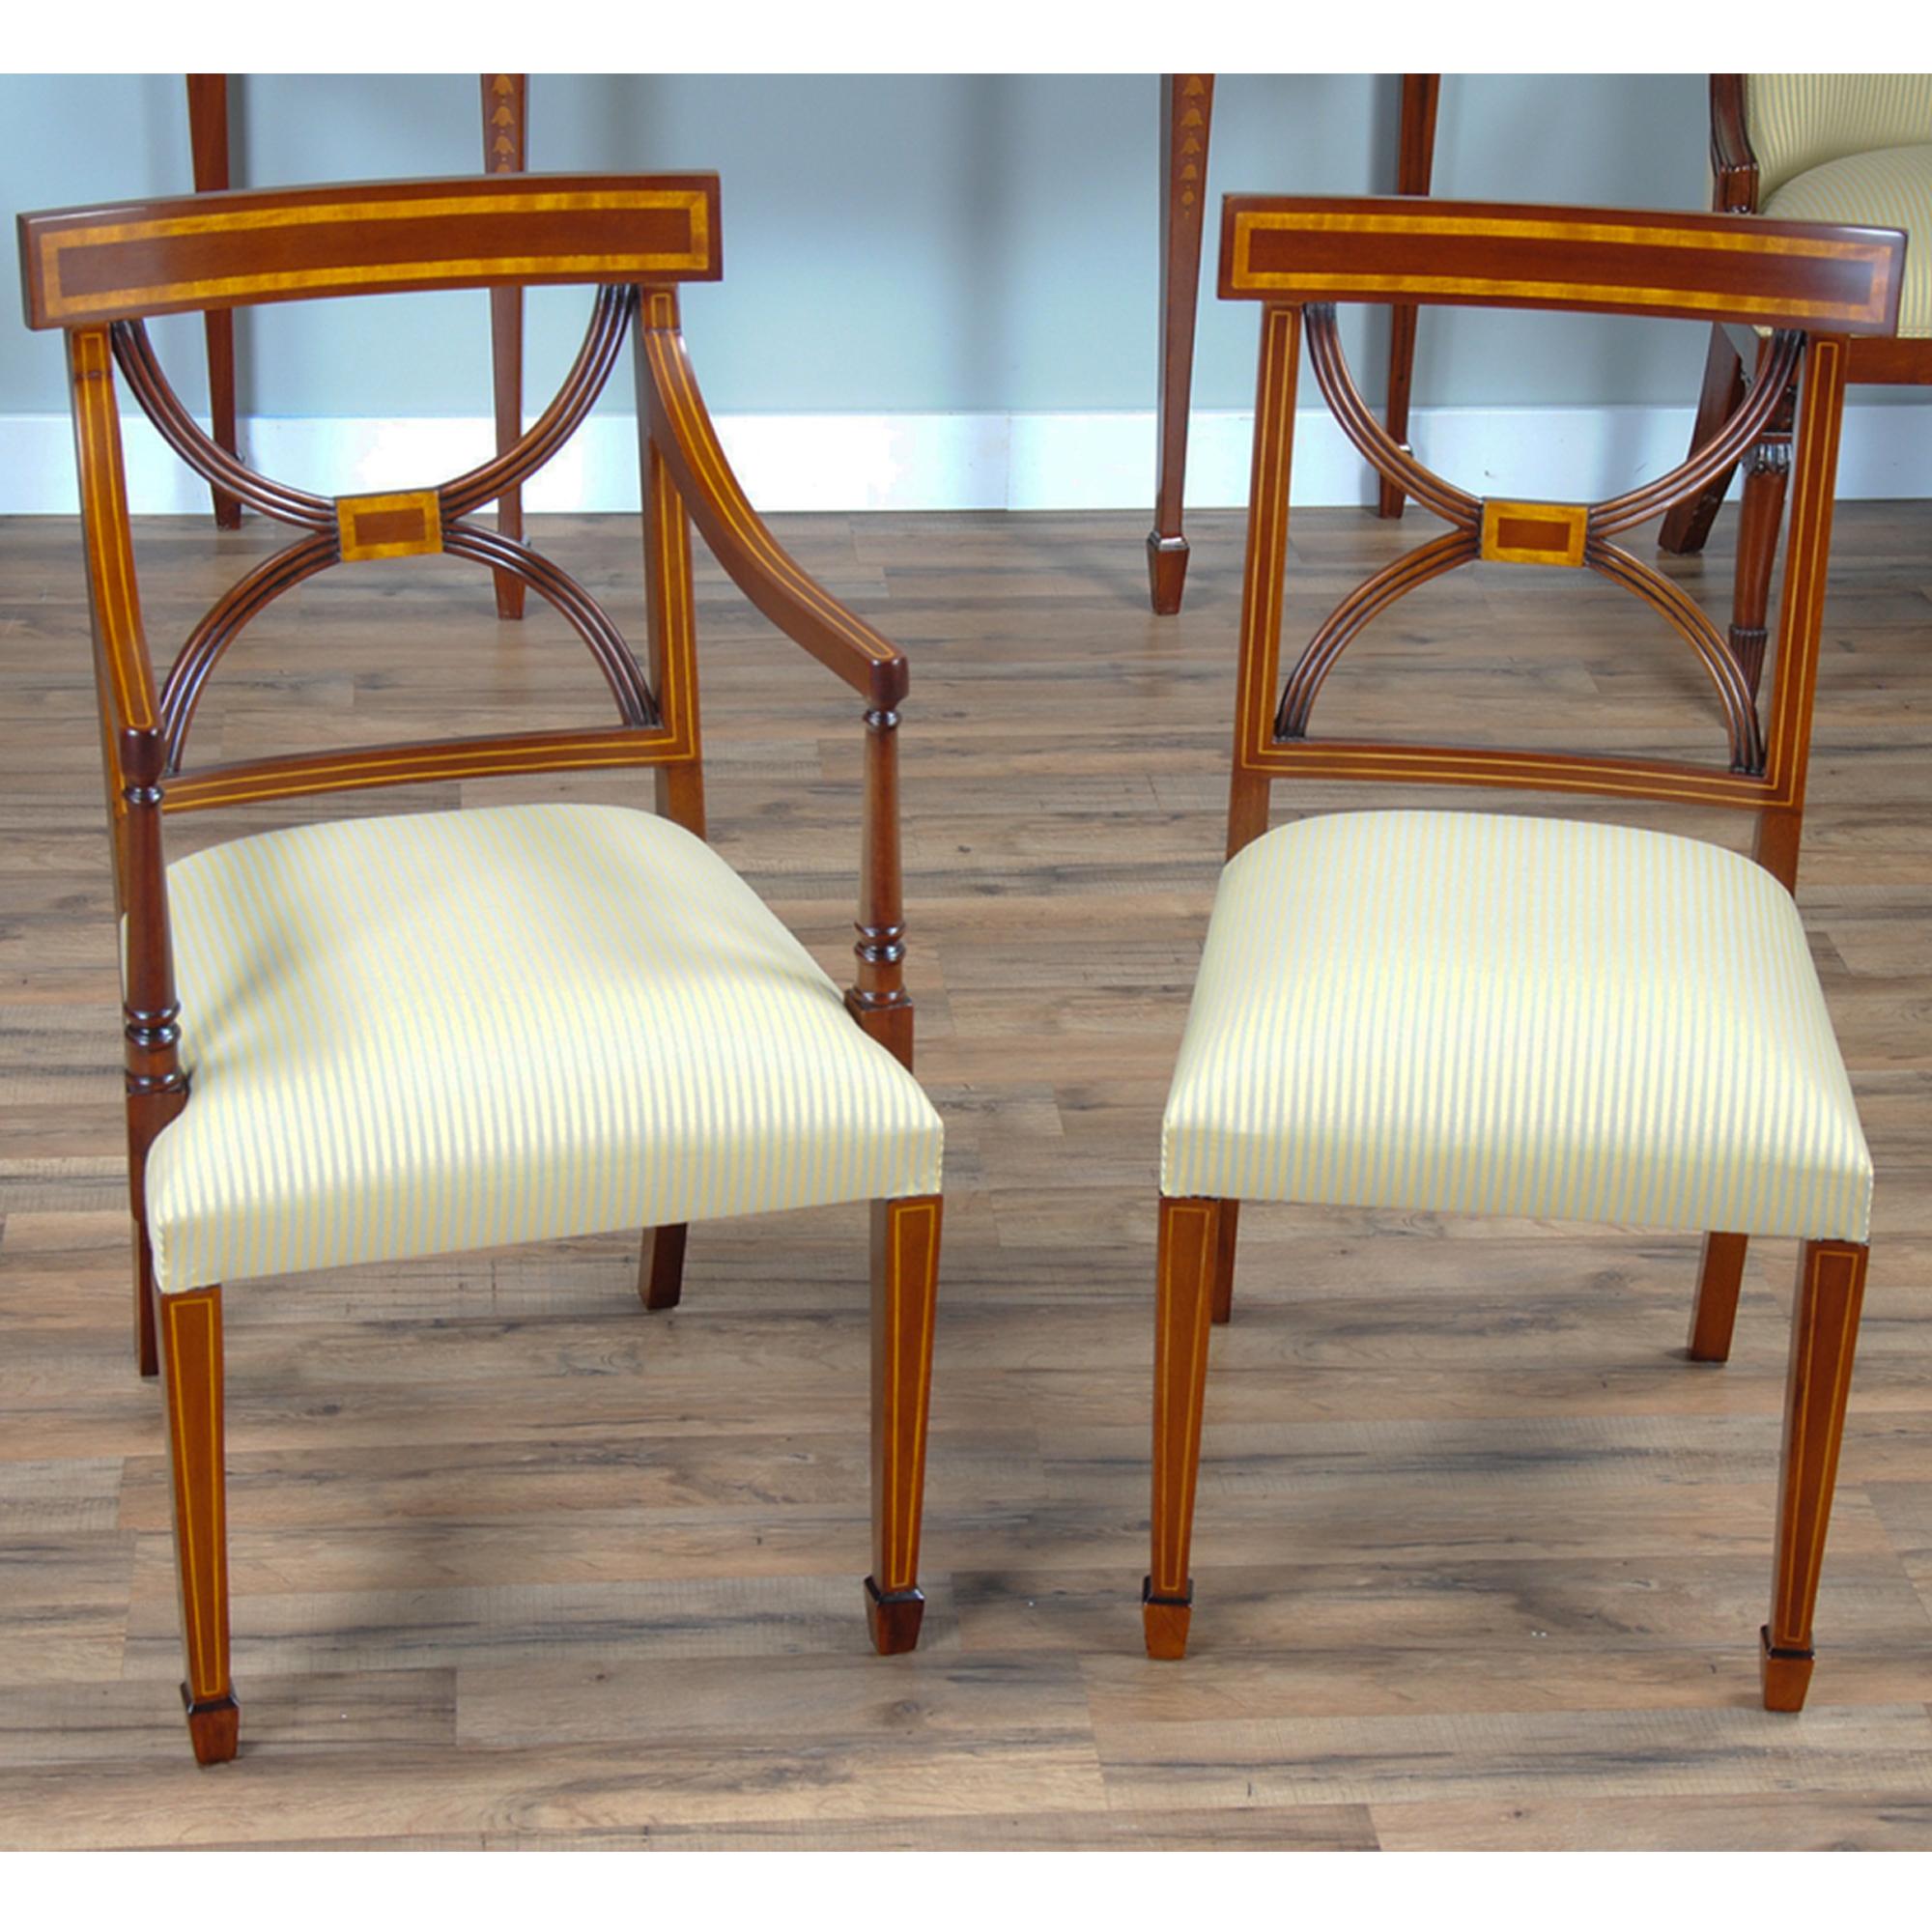 This set of 10 Sheraton Inlaid mahogany chairs consists of 2 arm chairs and 8 side chairs. Each chair is created from the finest grade of plantation grown solid mahogany and the finest available veneers. All of these materials come together to